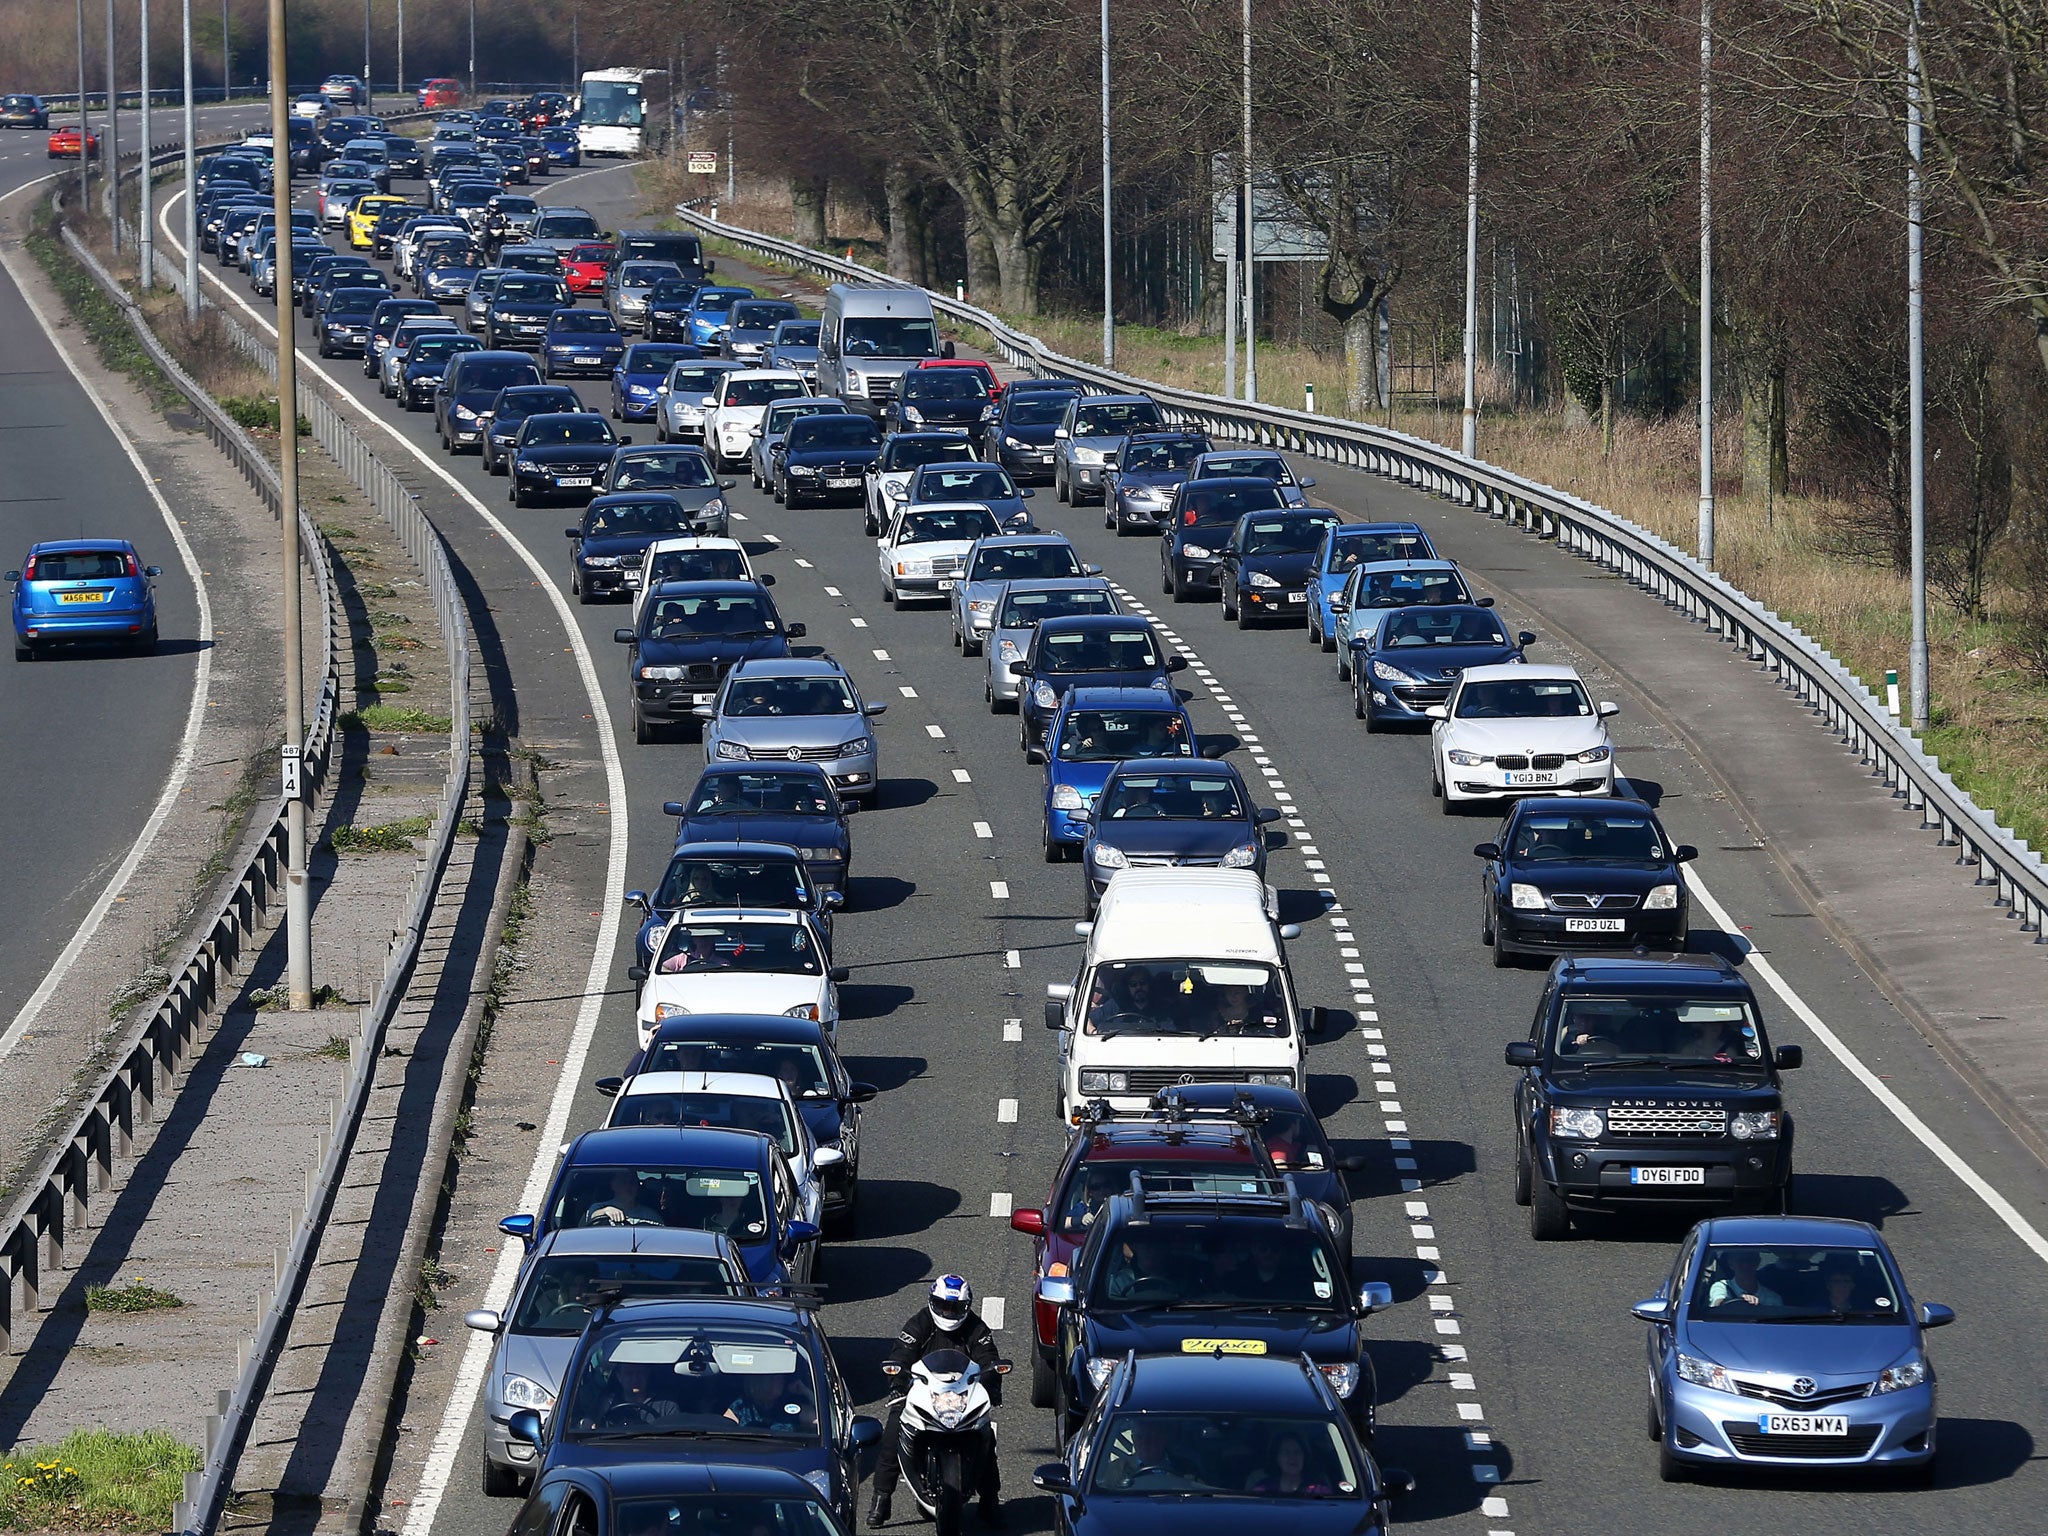 Cars queue on the A23 near Brighton, East Sussex, as visitors to the city take advantage of the warm weather (PA)